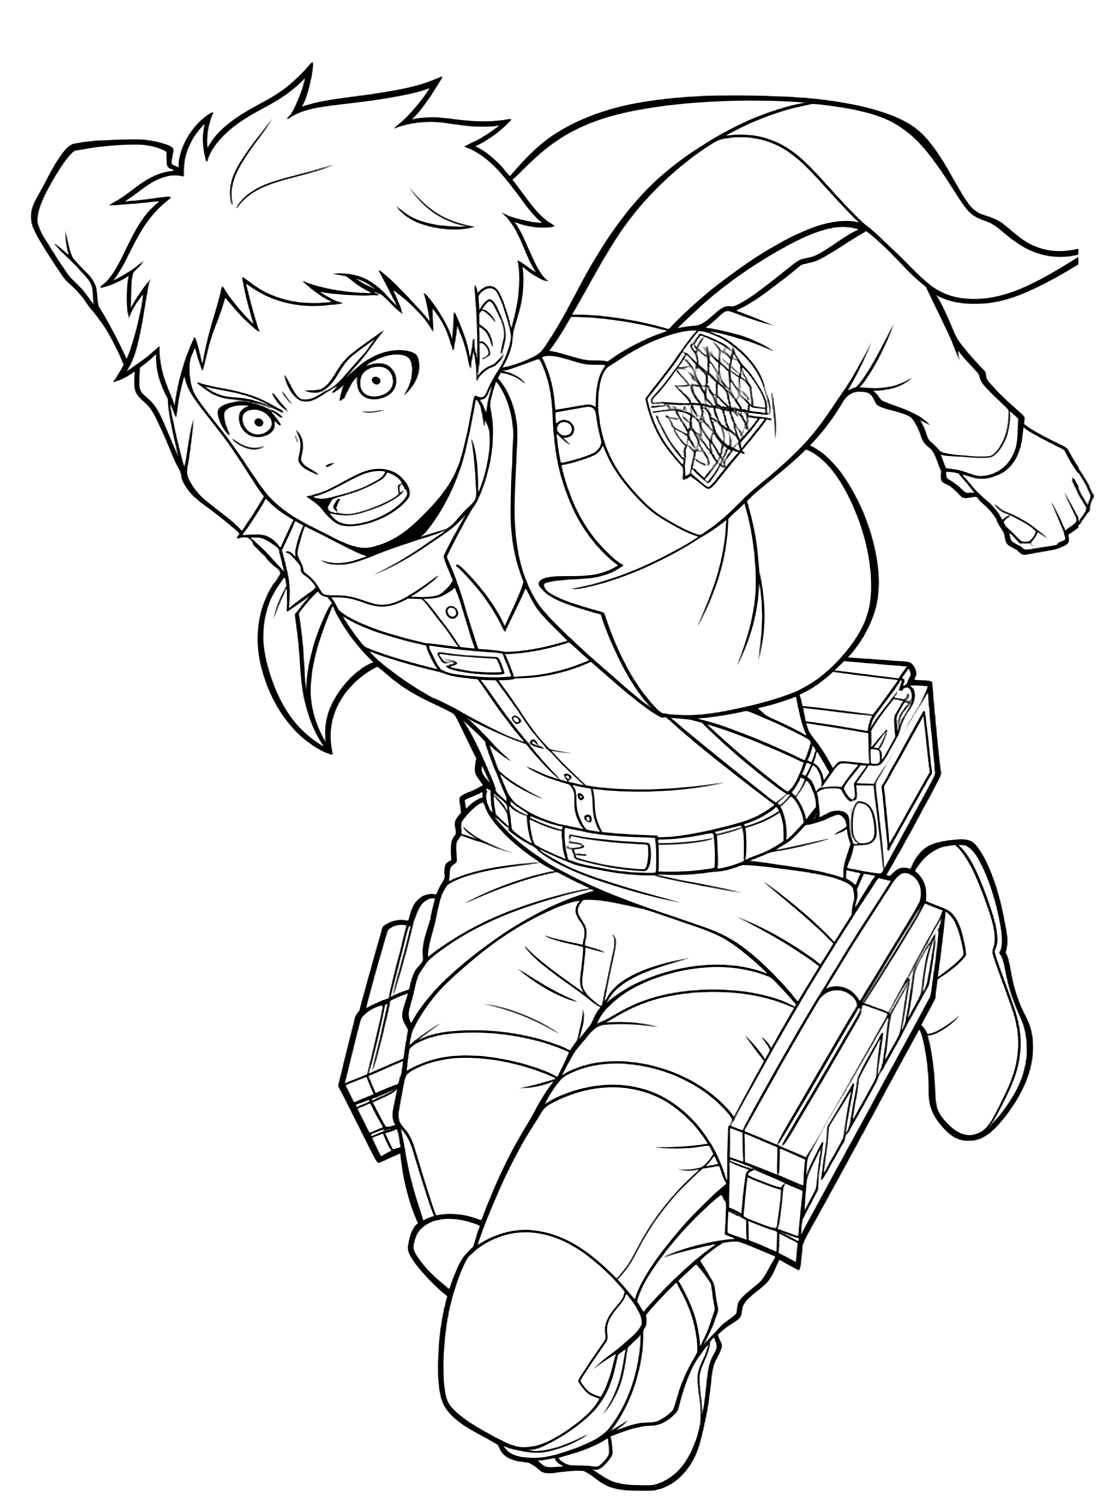 Eren Yeager in Battle Coloring Page from Eren Yeager